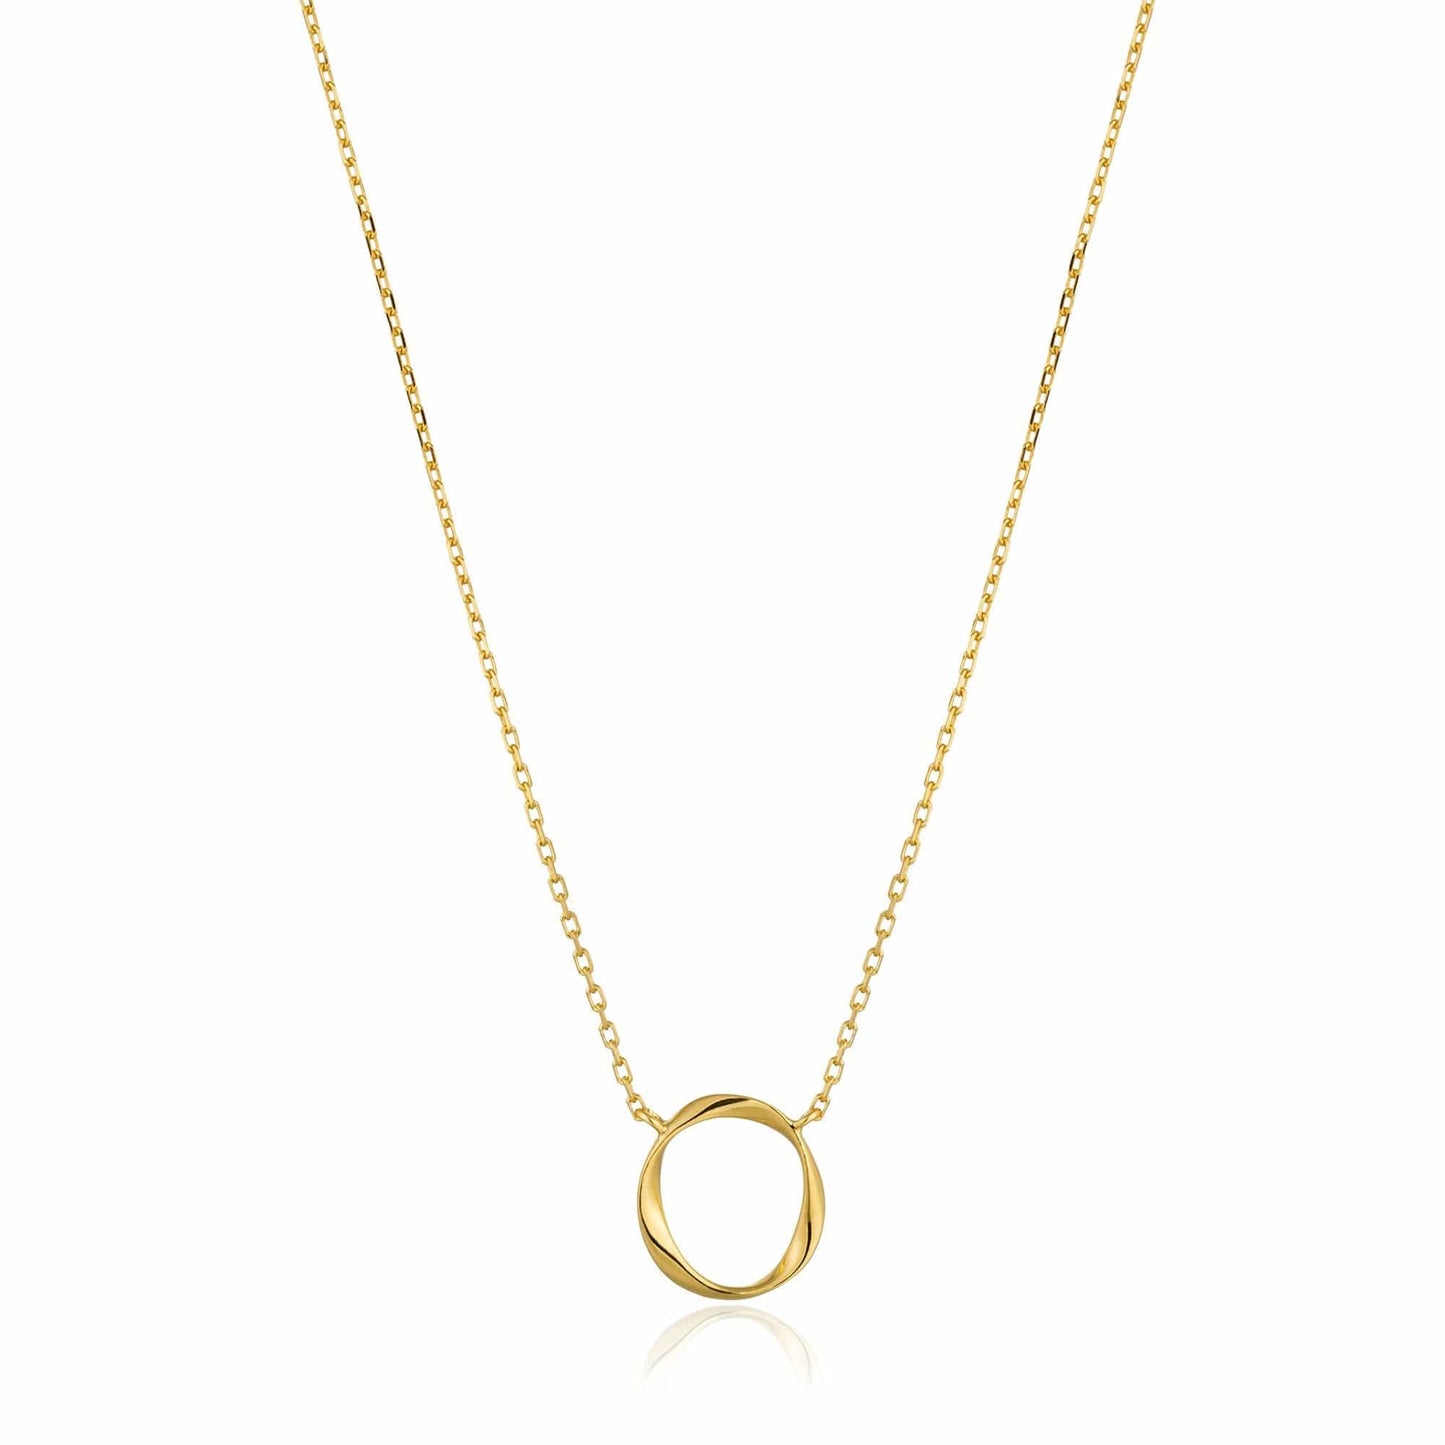 NKL-GPL Gold Swirl Necklace